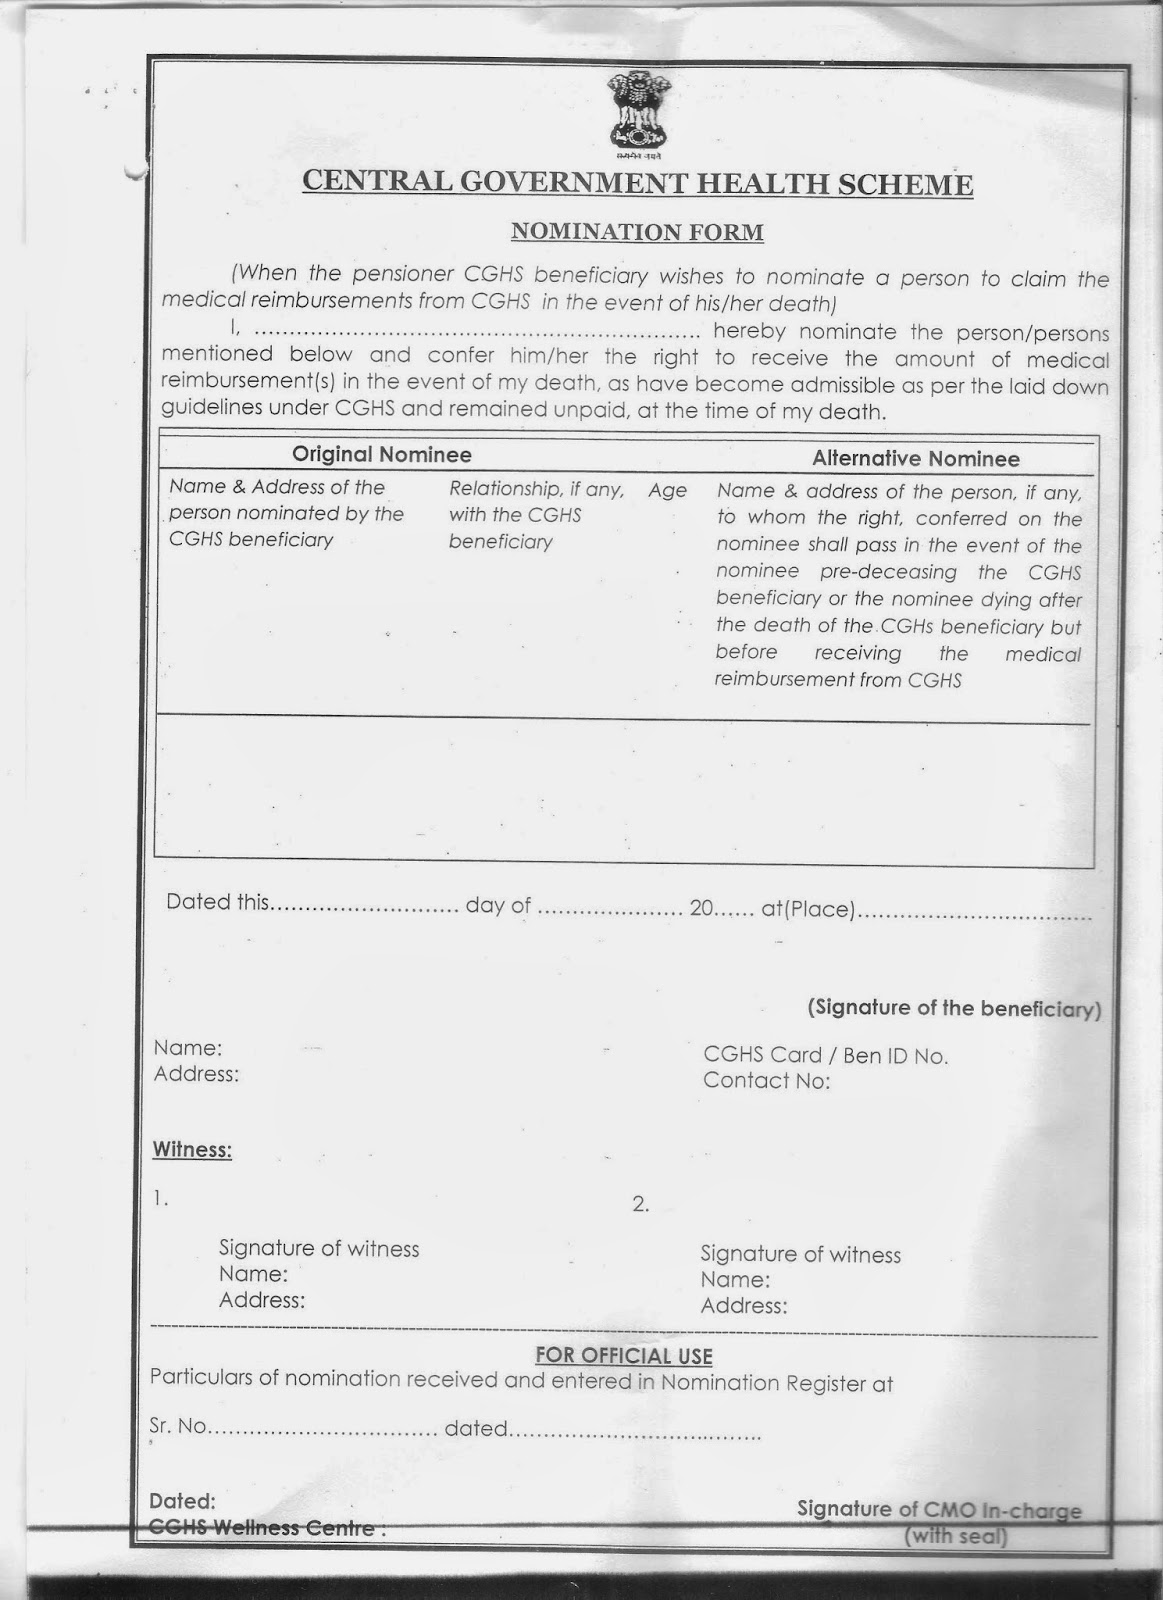 download-form-for-new-cghs-card-cardforms